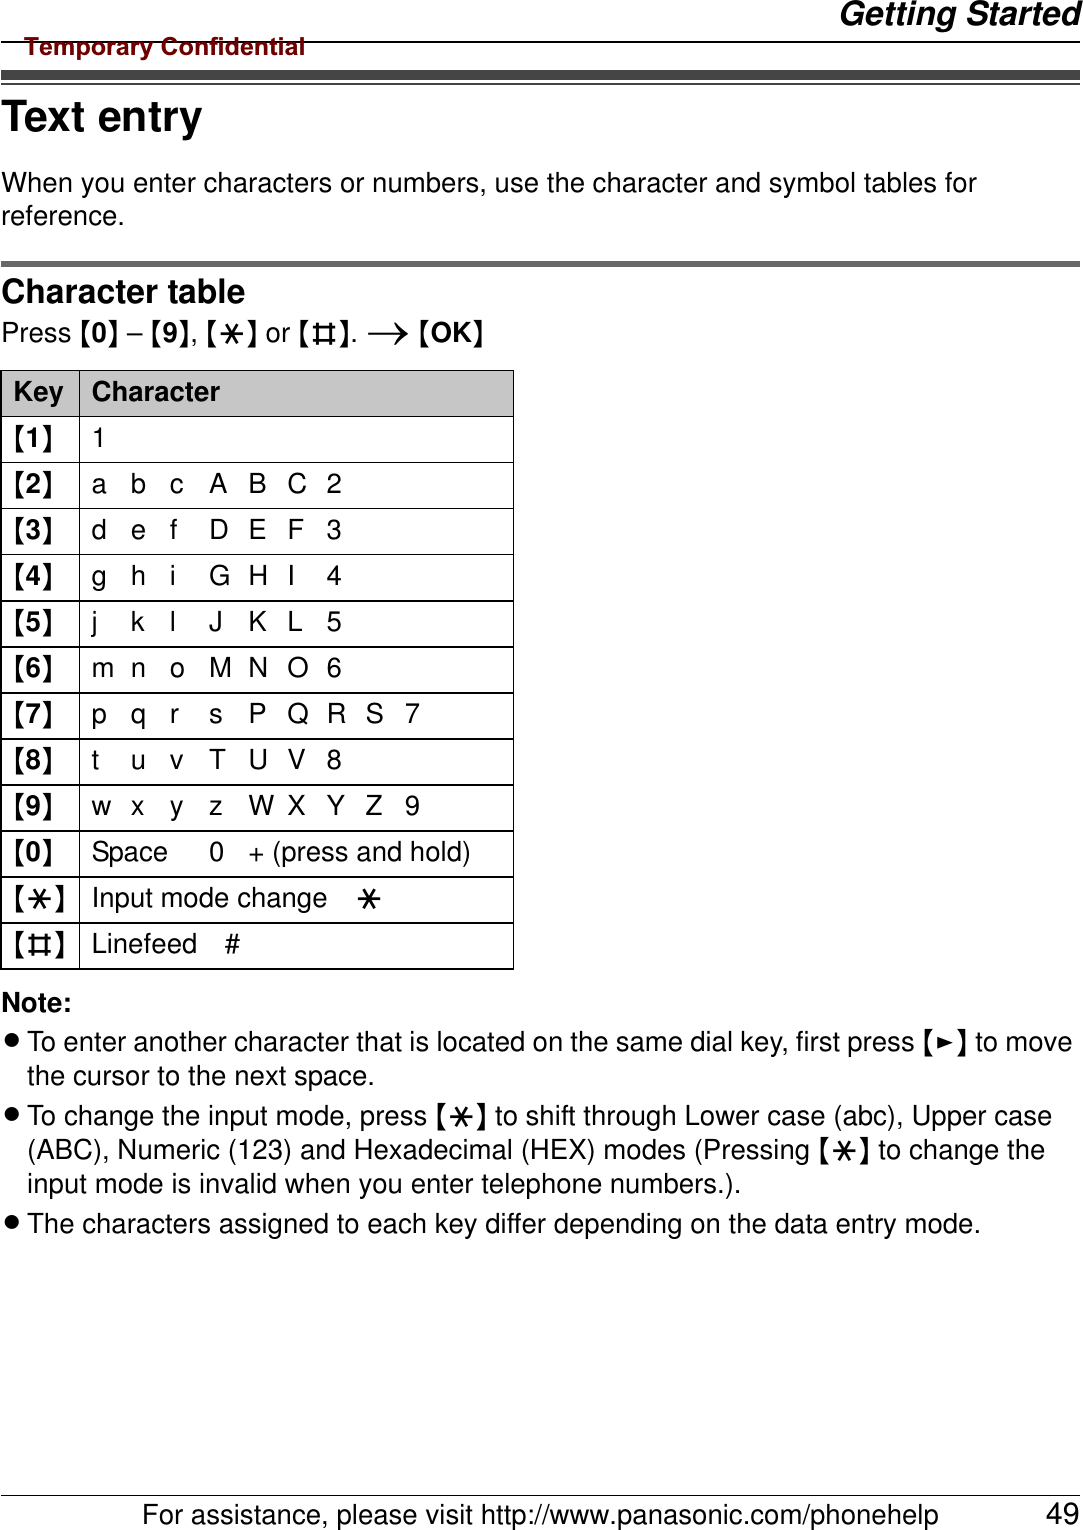 Getting StartedFor assistance, please visit http://www.panasonic.com/phonehelp 49Text entryWhen you enter characters or numbers, use the character and symbol tables for reference.Character tablePress {0} – {9}, {*} or {#}. i {OK}Note:LTo enter another character that is located on the same dial key, first press {&gt;} to move the cursor to the next space.LTo change the input mode, press {*} to shift through Lower case (abc), Upper case (ABC), Numeric (123) and Hexadecimal (HEX) modes (Pressing {*} to change the input mode is invalid when you enter telephone numbers.).LThe characters assigned to each key differ depending on the data entry mode.Key Character{1}1{2}abcABC2{3}def DEF3{4}ghi GHI 4{5}jklJKL5{6}mn o MNO6{7}pqr sPQRS7{8}tuvTUV8{9}wxyzWXYZ9{0}Space 0 + (press and hold){*} Input mode change *{#} Linefeed #Temporary Confidential